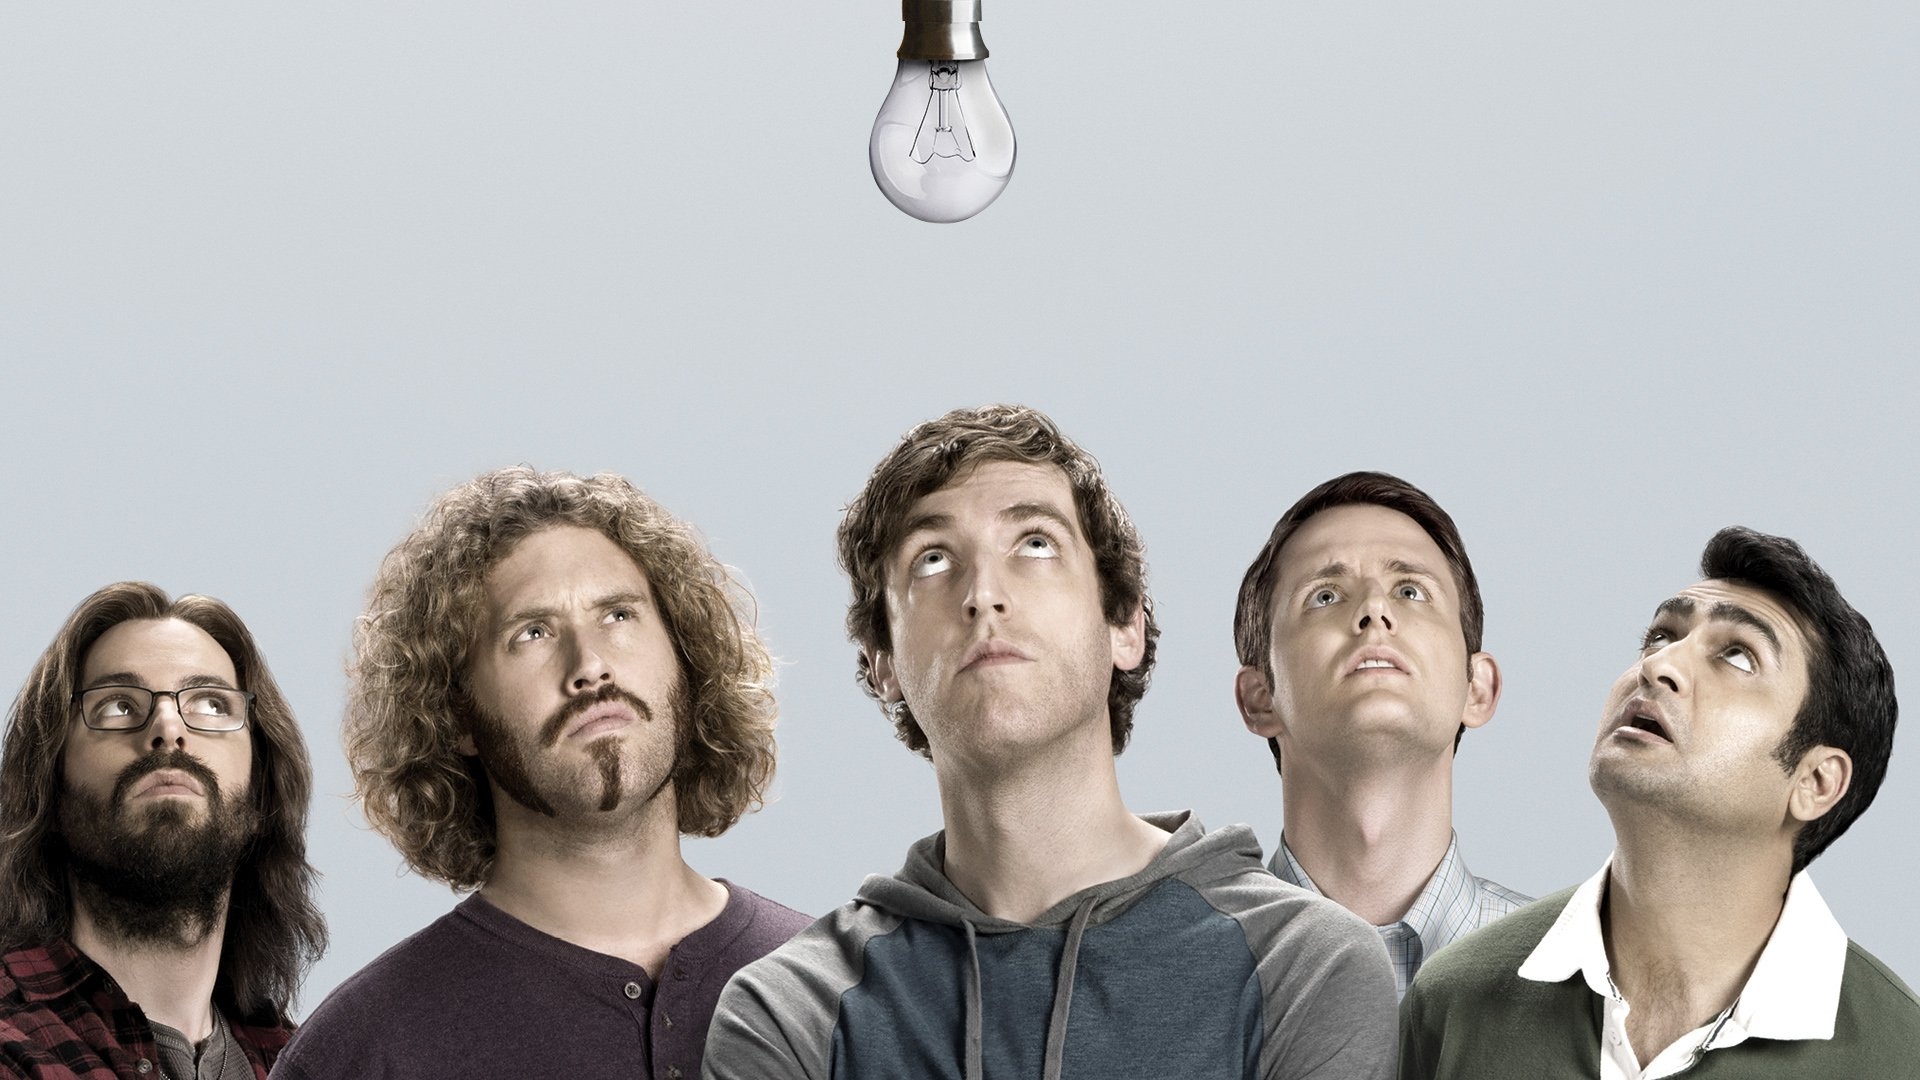 Silicon Valley, High definition wallpapers, Tech-based comedy, Must-see series, 1920x1080 Full HD Desktop